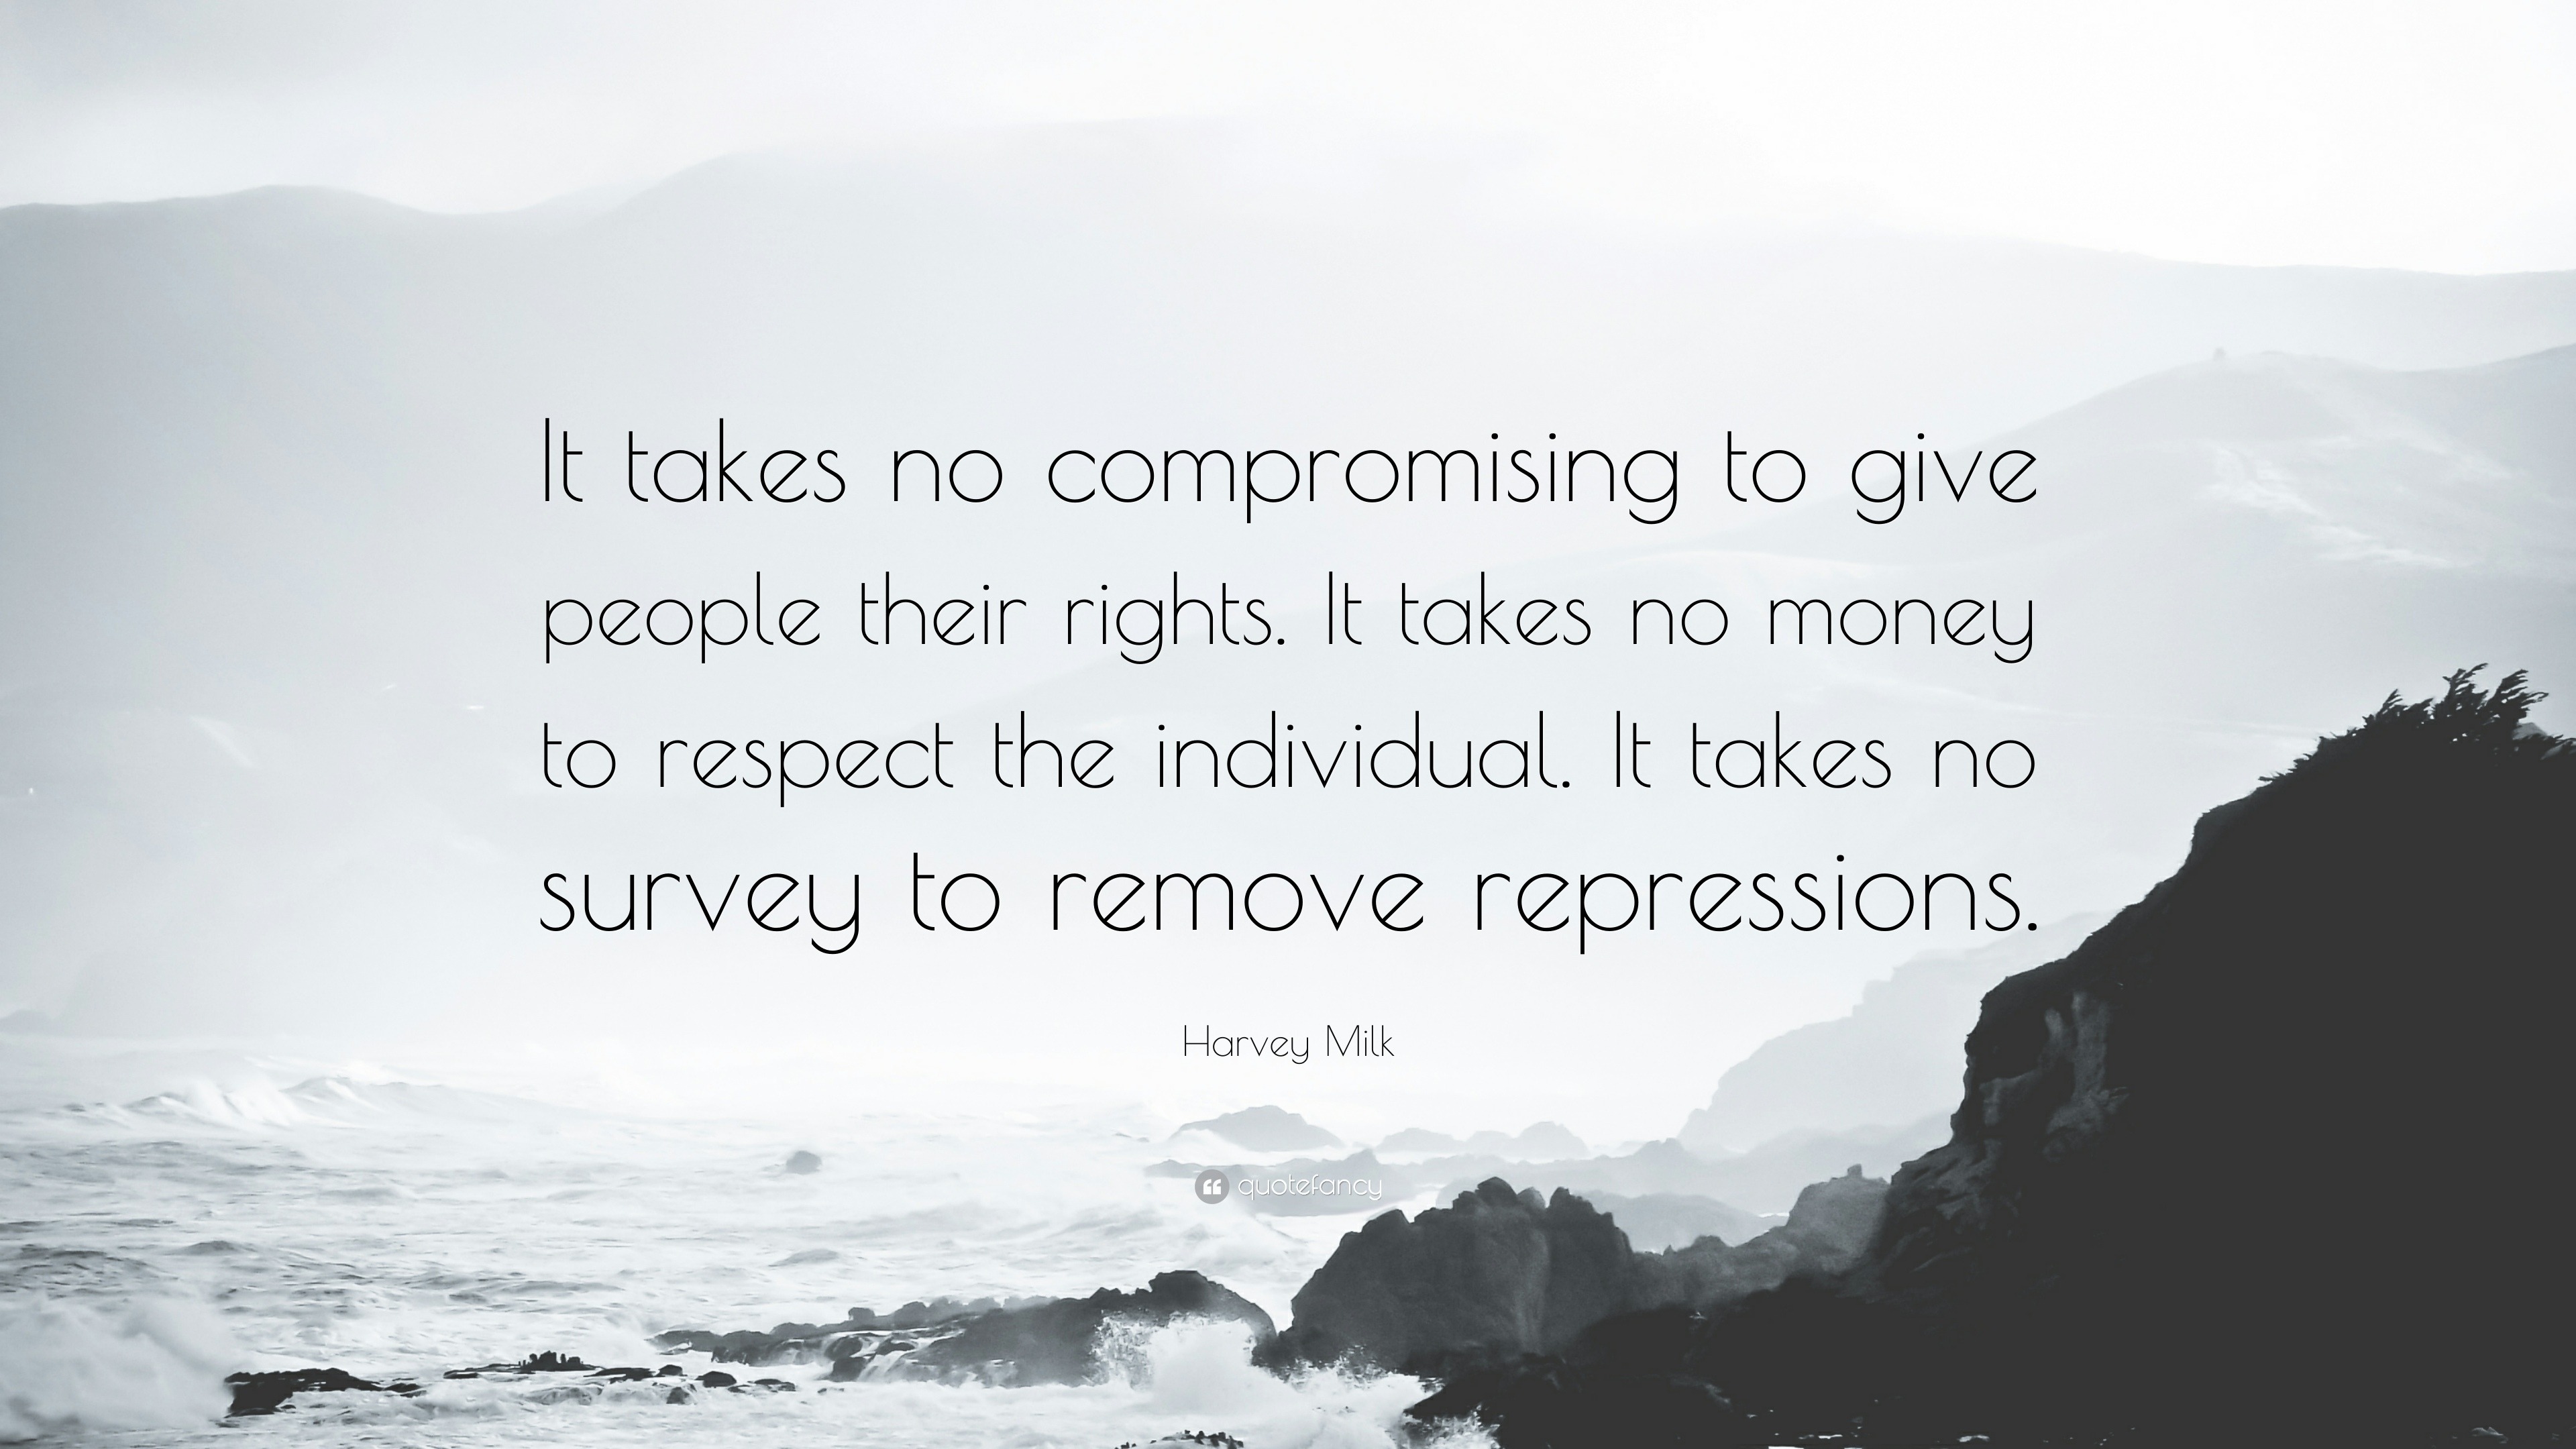 Harvey Milk Quote: “It takes no compromising to give people their